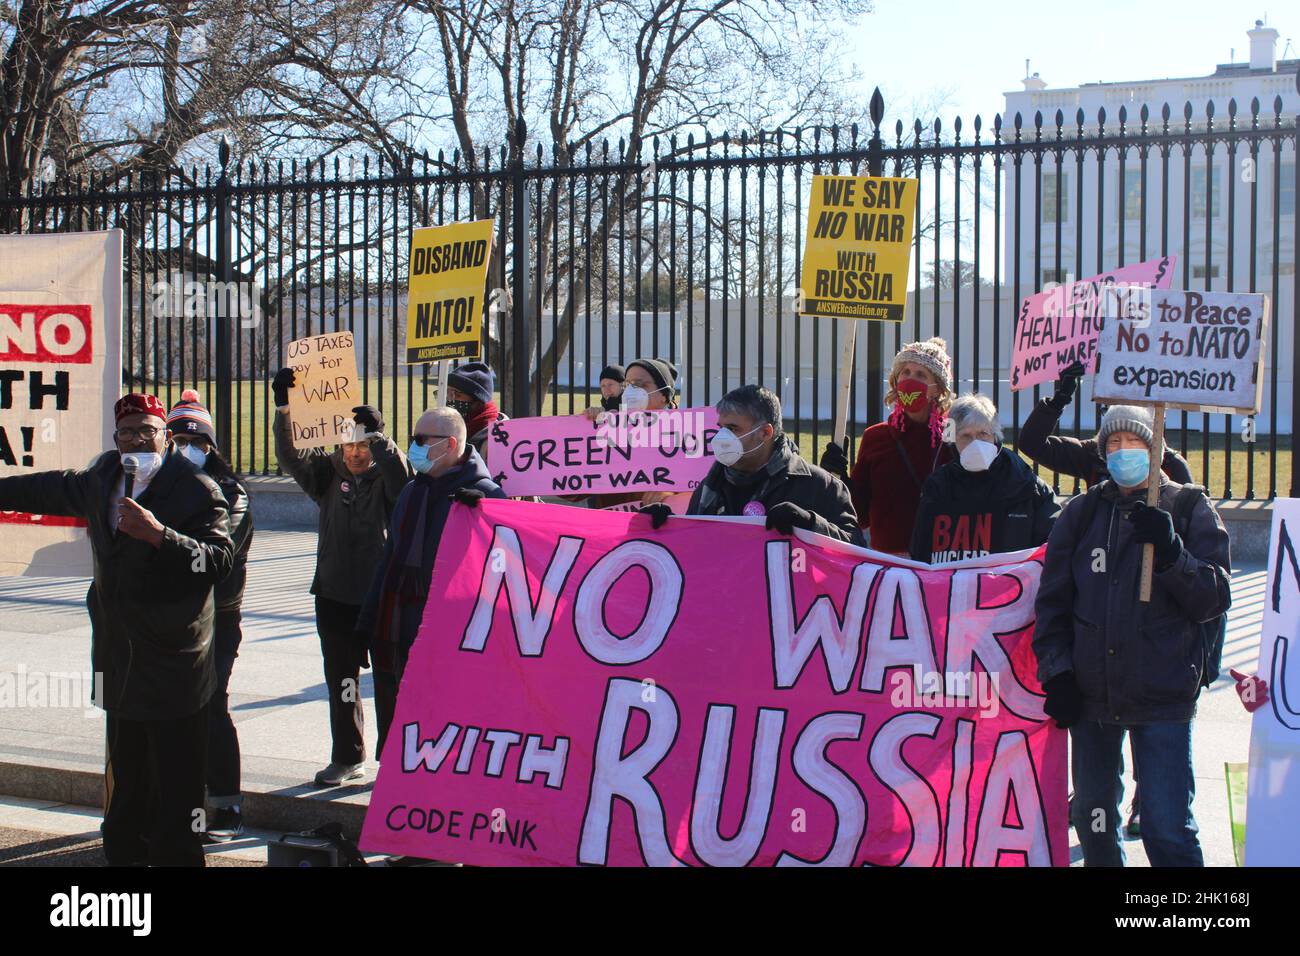 Washington, D.C. - JANUARY 27: Around 100 people took part in a rally today outside the White House in Washington D.C. Today calling on Biden and the U.S. to say no to War with Russia and  Hands of the Ukraine Members of the Russian-speaking diaspora and Ukrainian activists demonstrated amid threat of Russian invasion of the Ukraine. Credit: Mark Apollo / Alamy Stock Photo Stock Photo